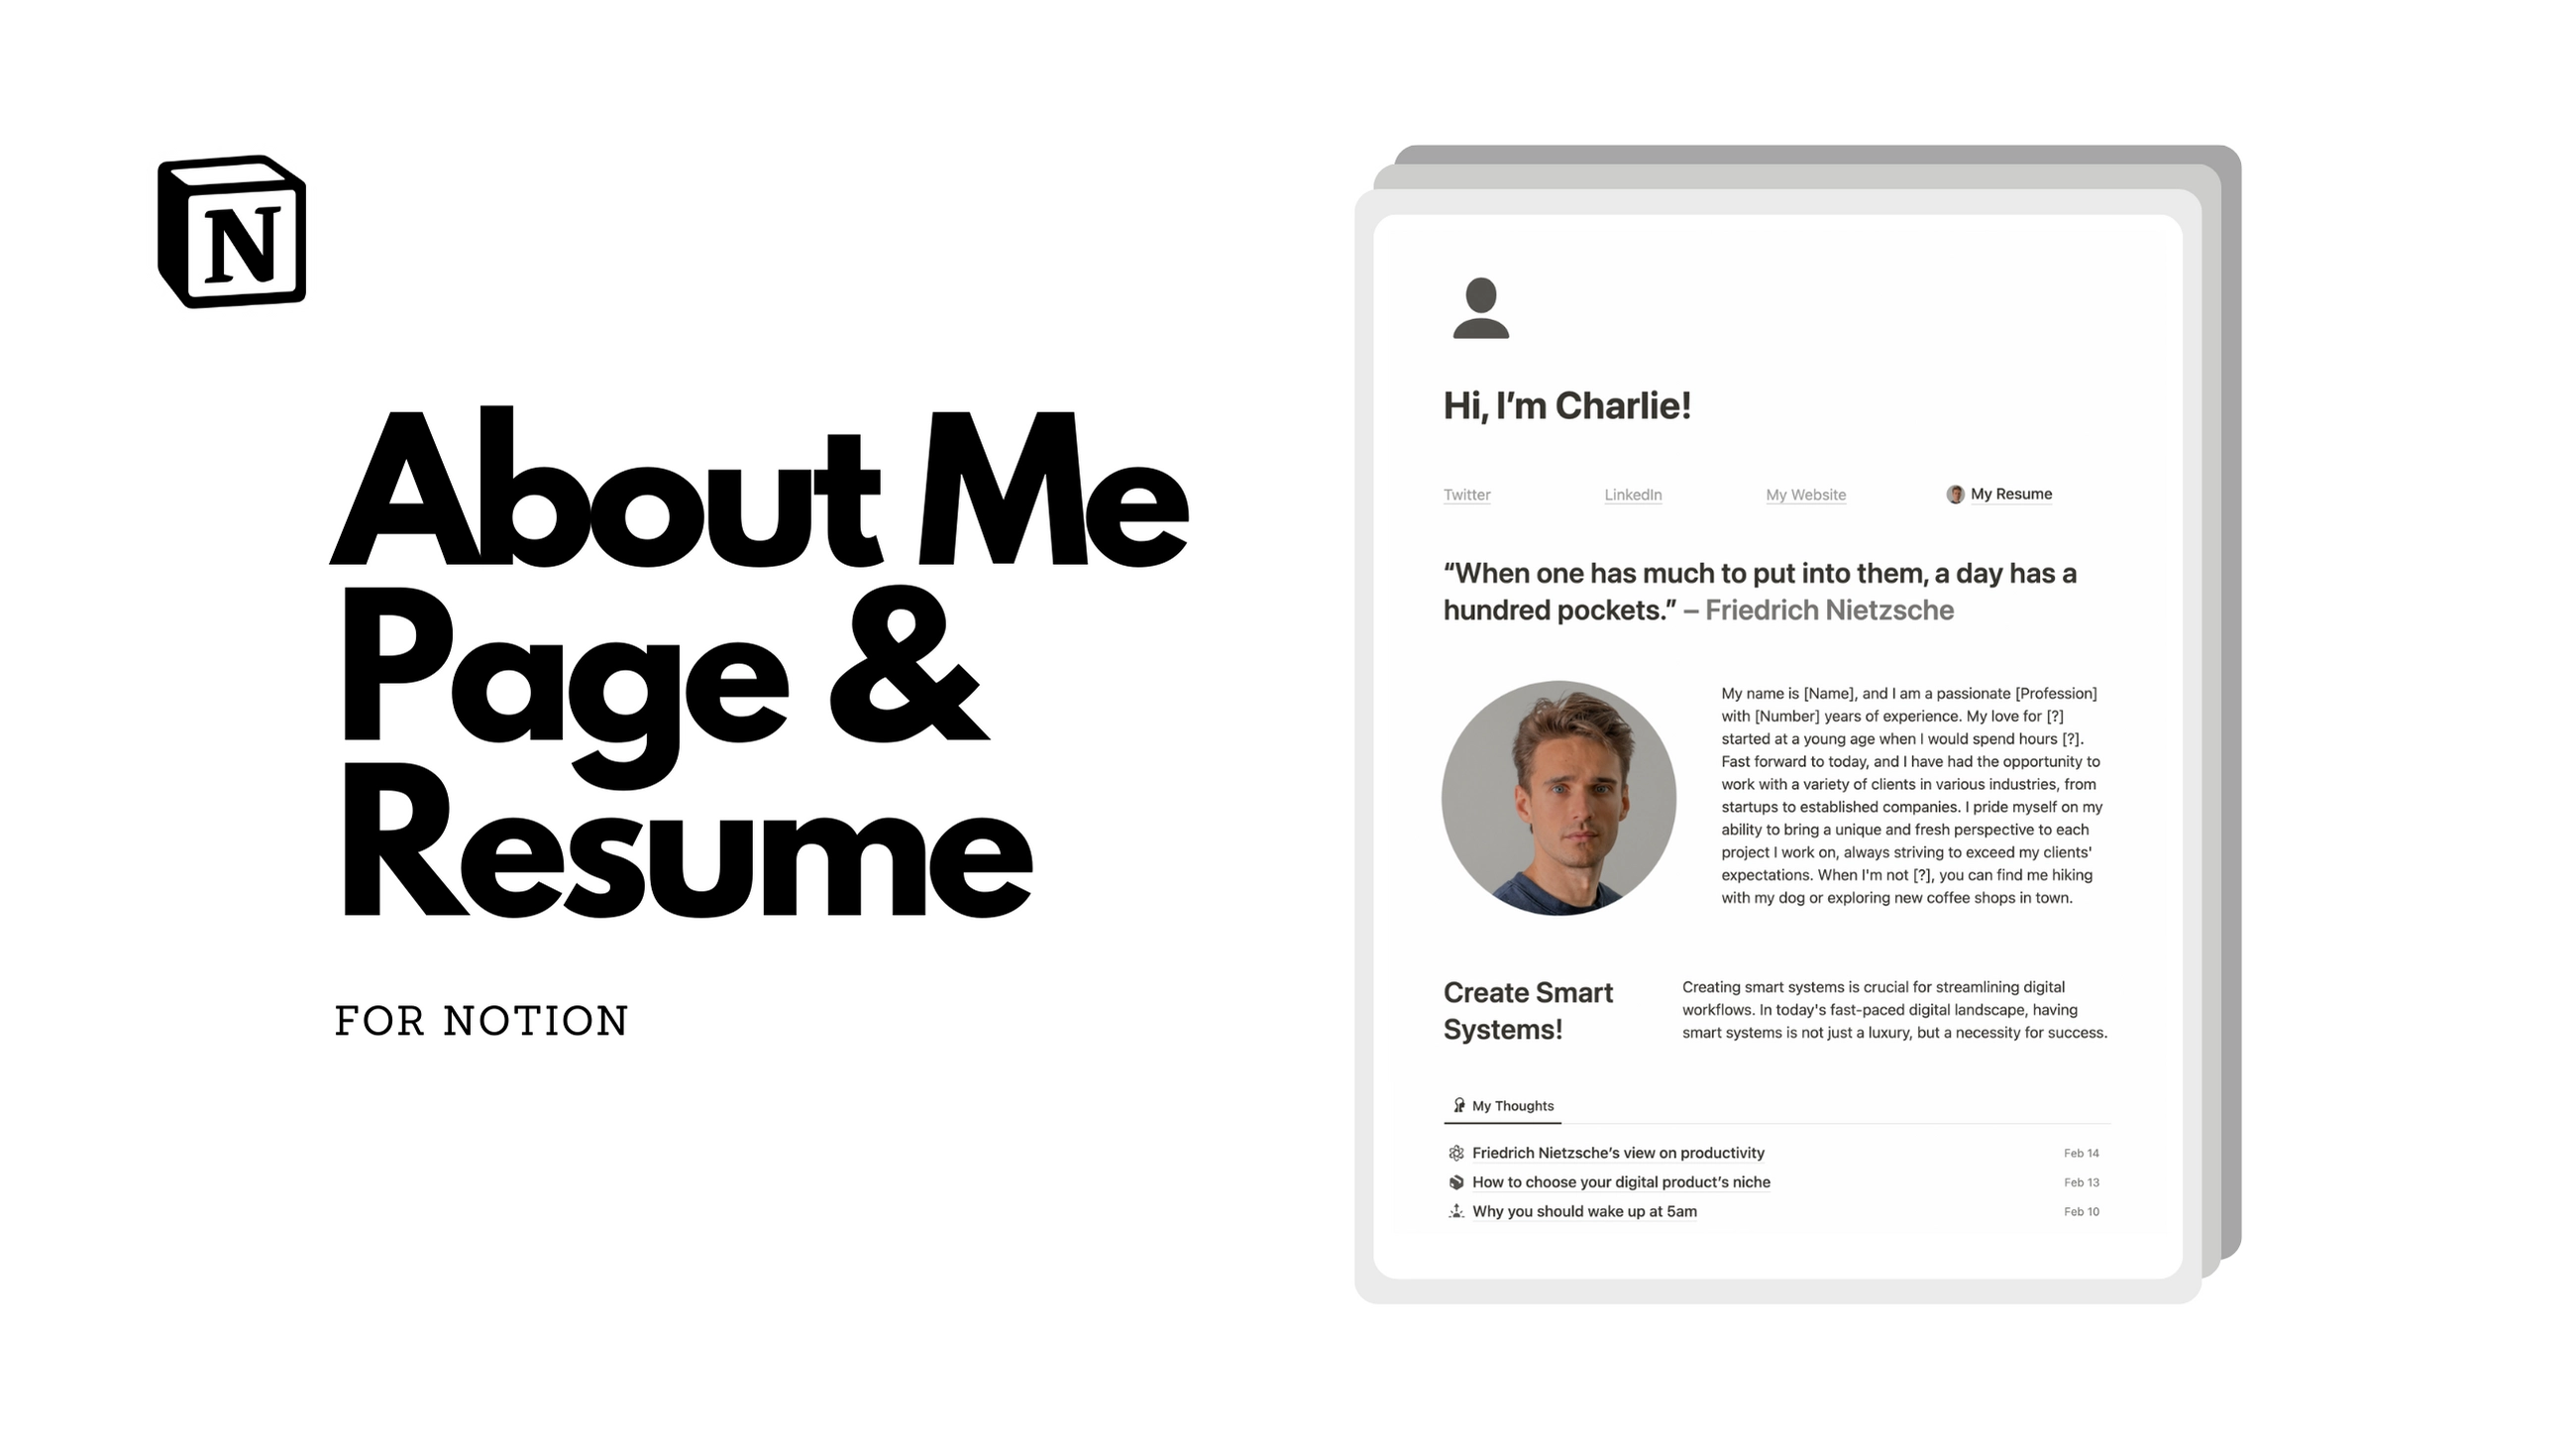 About Me Page & Resume for Notion